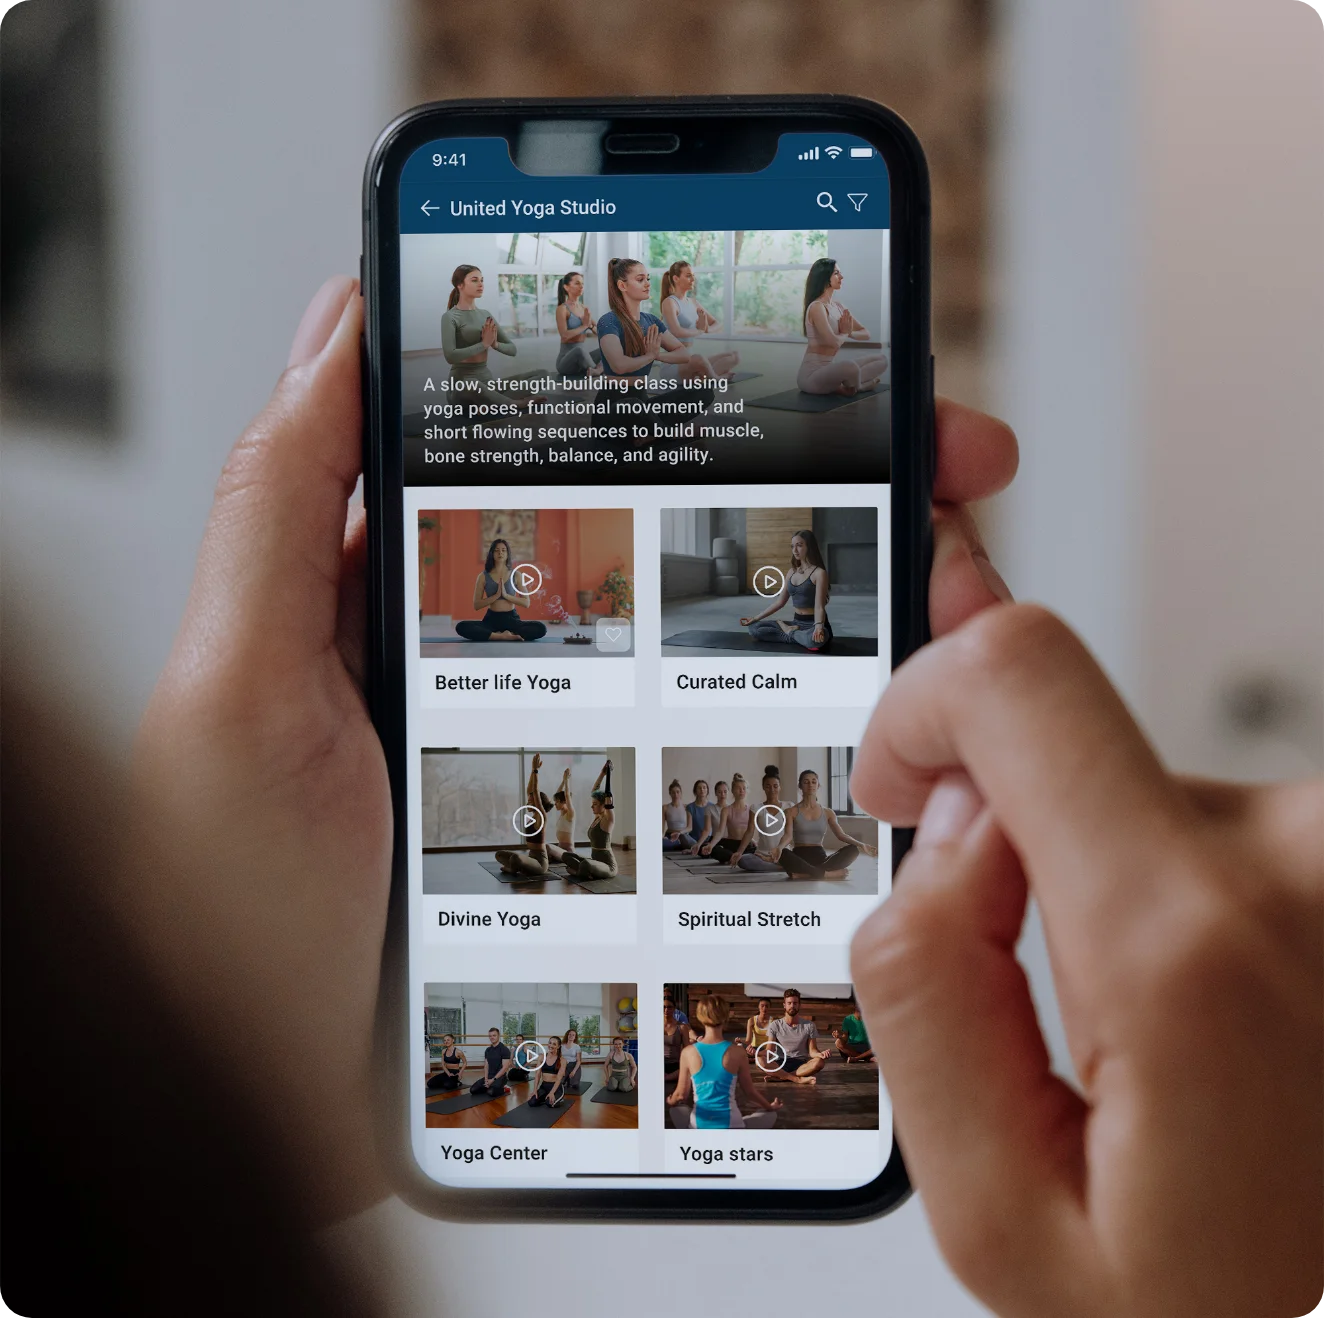 Yoga studio software's personalized widget for video-on-demand